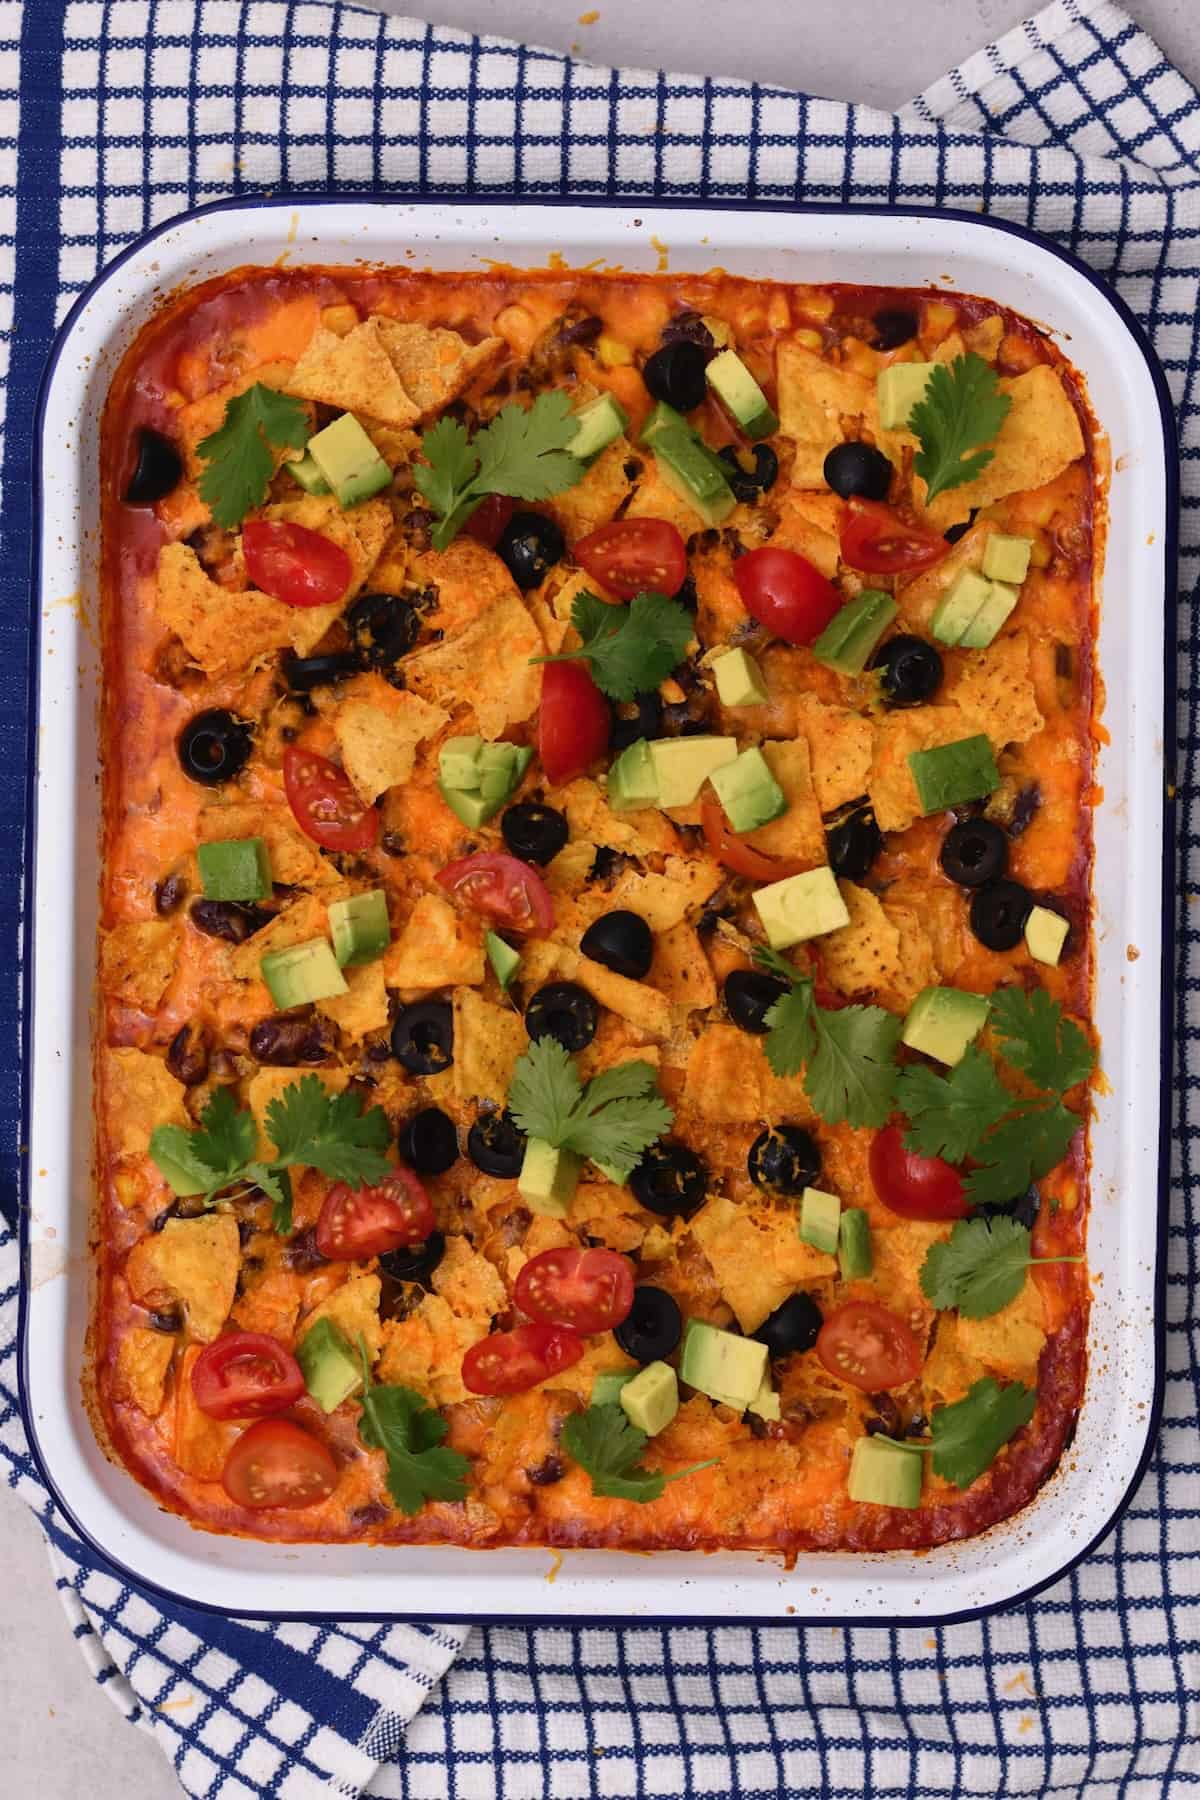 Freshly baked taco casserole topped with avocado, tomatoes, and cilantro